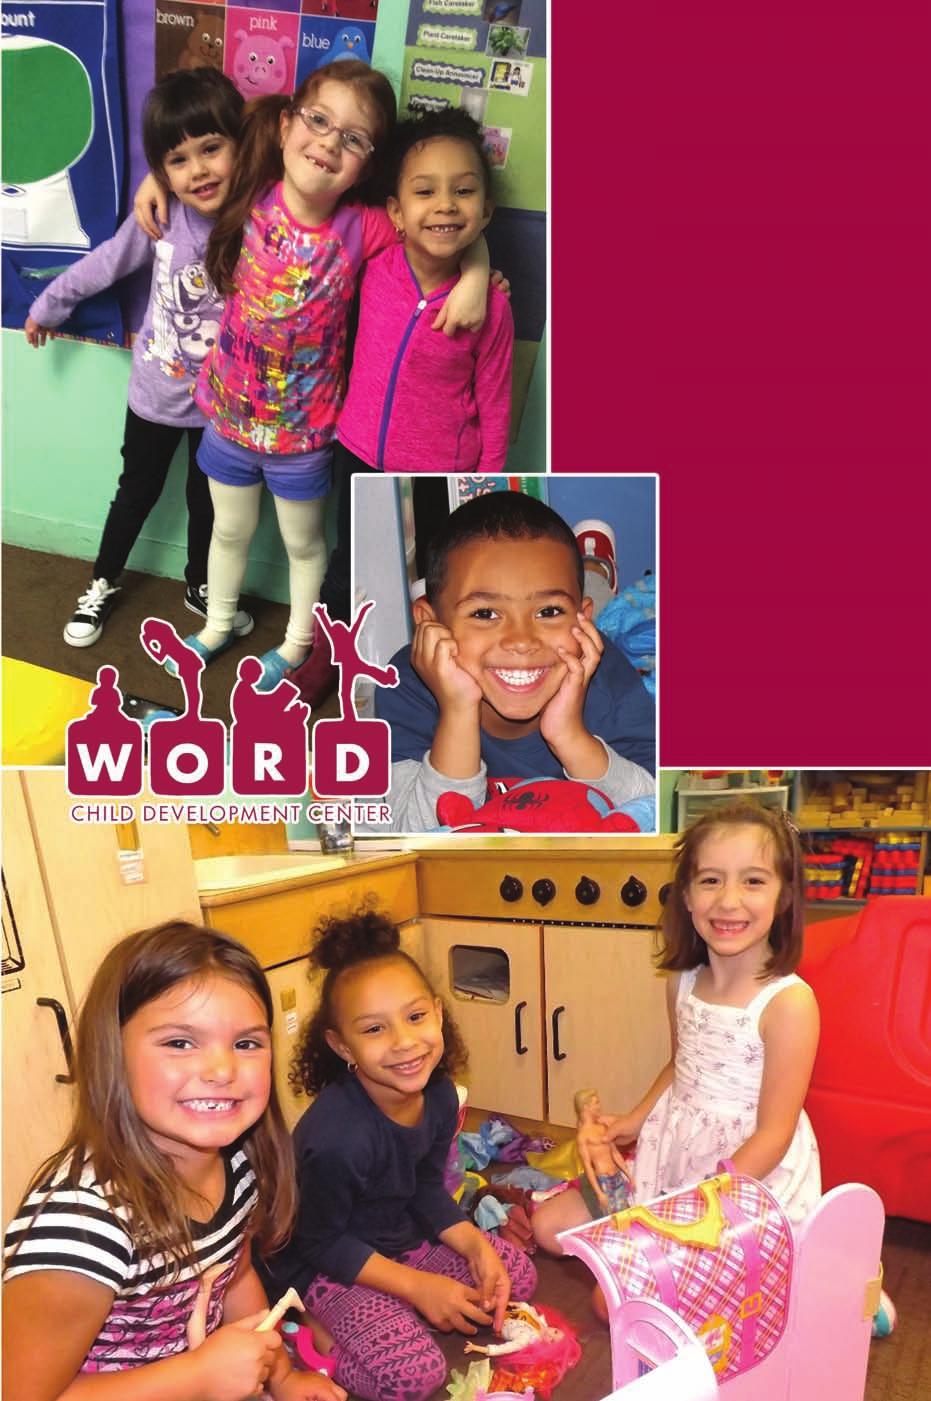 In early 2016, Family Service Association was proud to have WORD Child Development Center join our family of high quality programs.